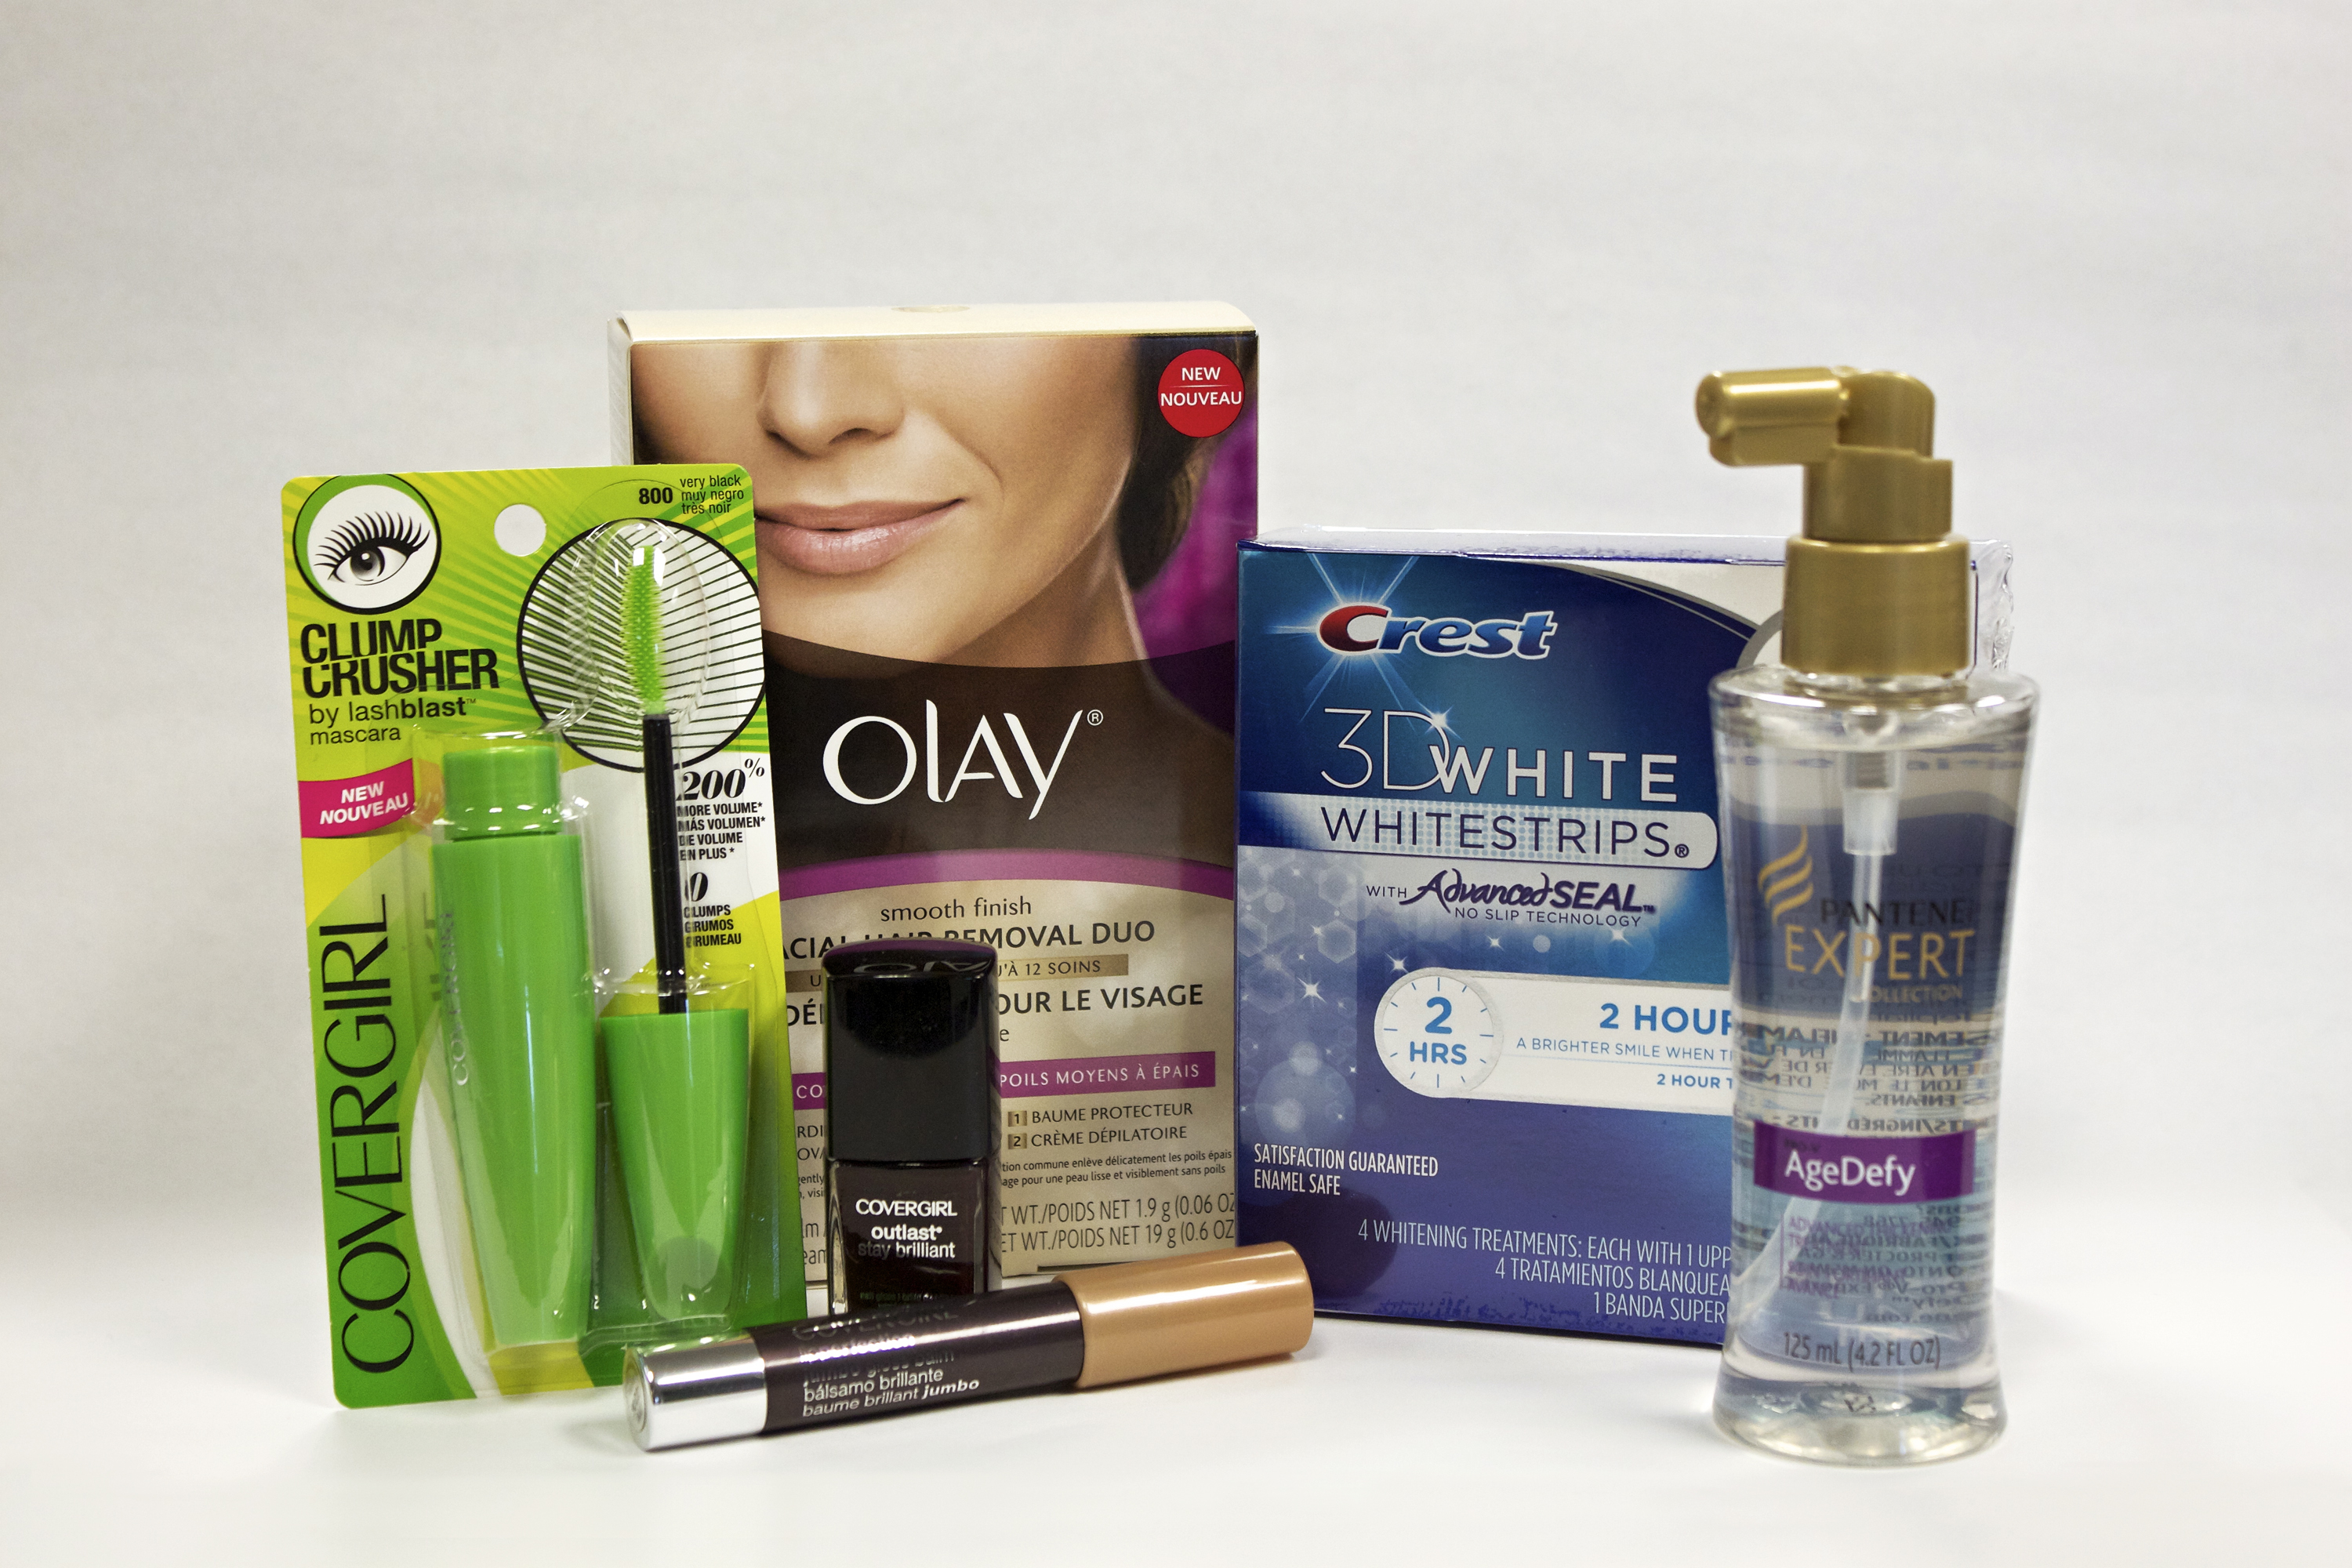 P&G beauty giveaway